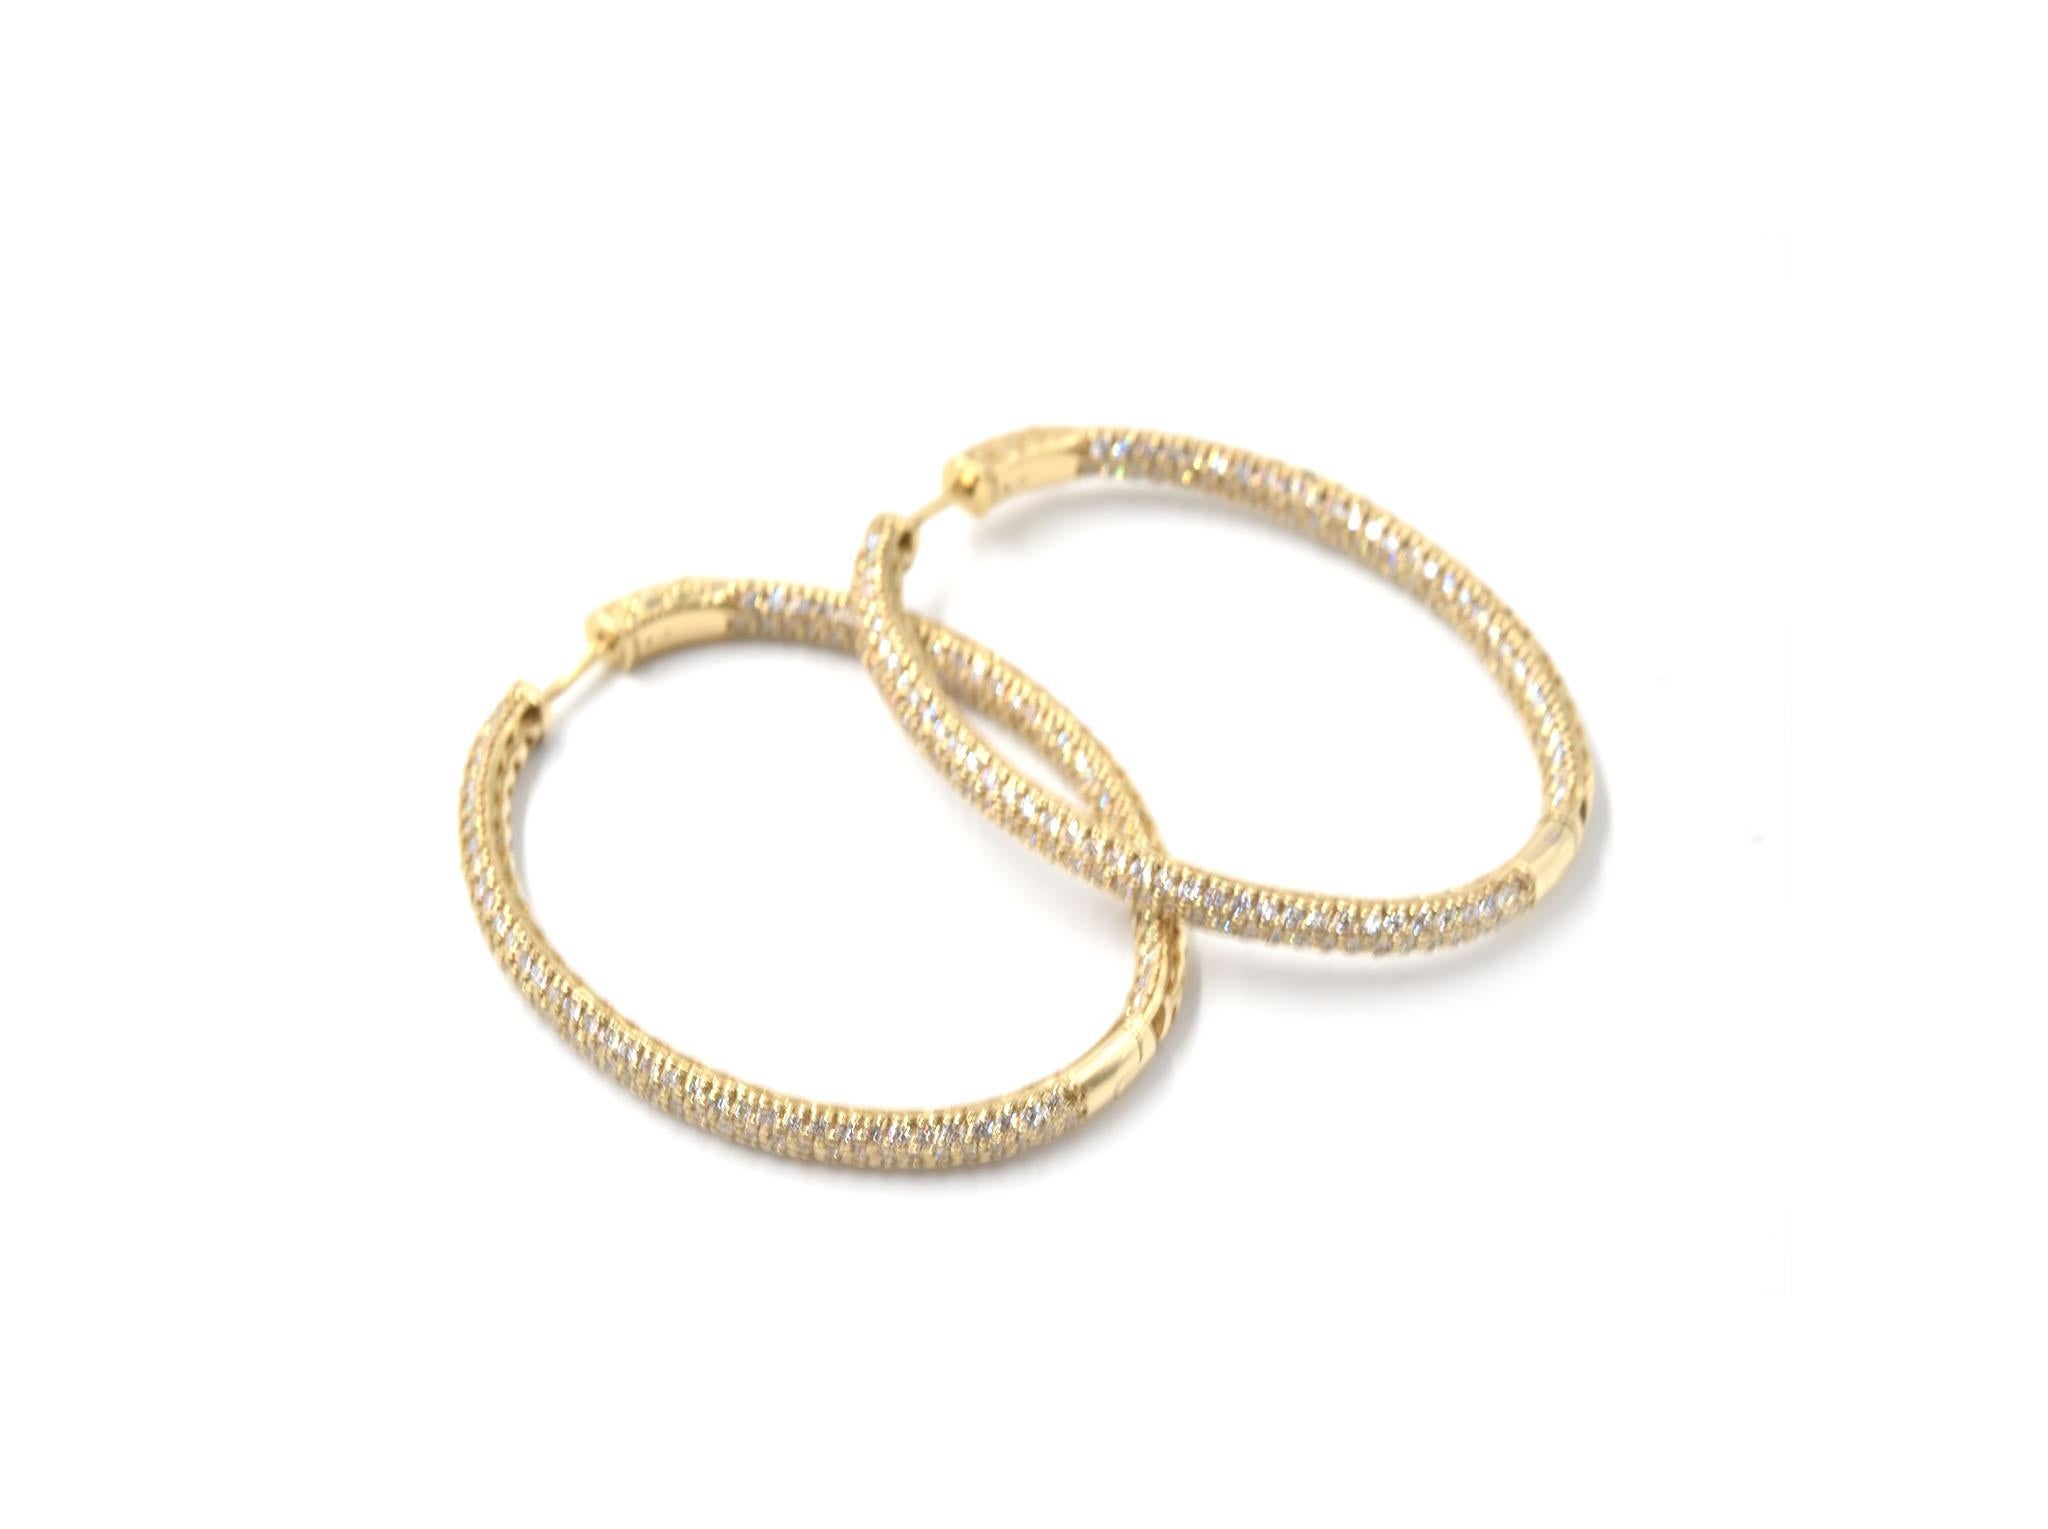 Designer: custom design
Material: 14k yellow gold
Diamonds: 400 round brilliant cut diamonds = 6.23 carat total weight
Color: G
Clarity: VS2
Dimensions: each earring is 2-inch long and 1 1/2-inch wide
Fastenings: snap closures
Weight: 20.38